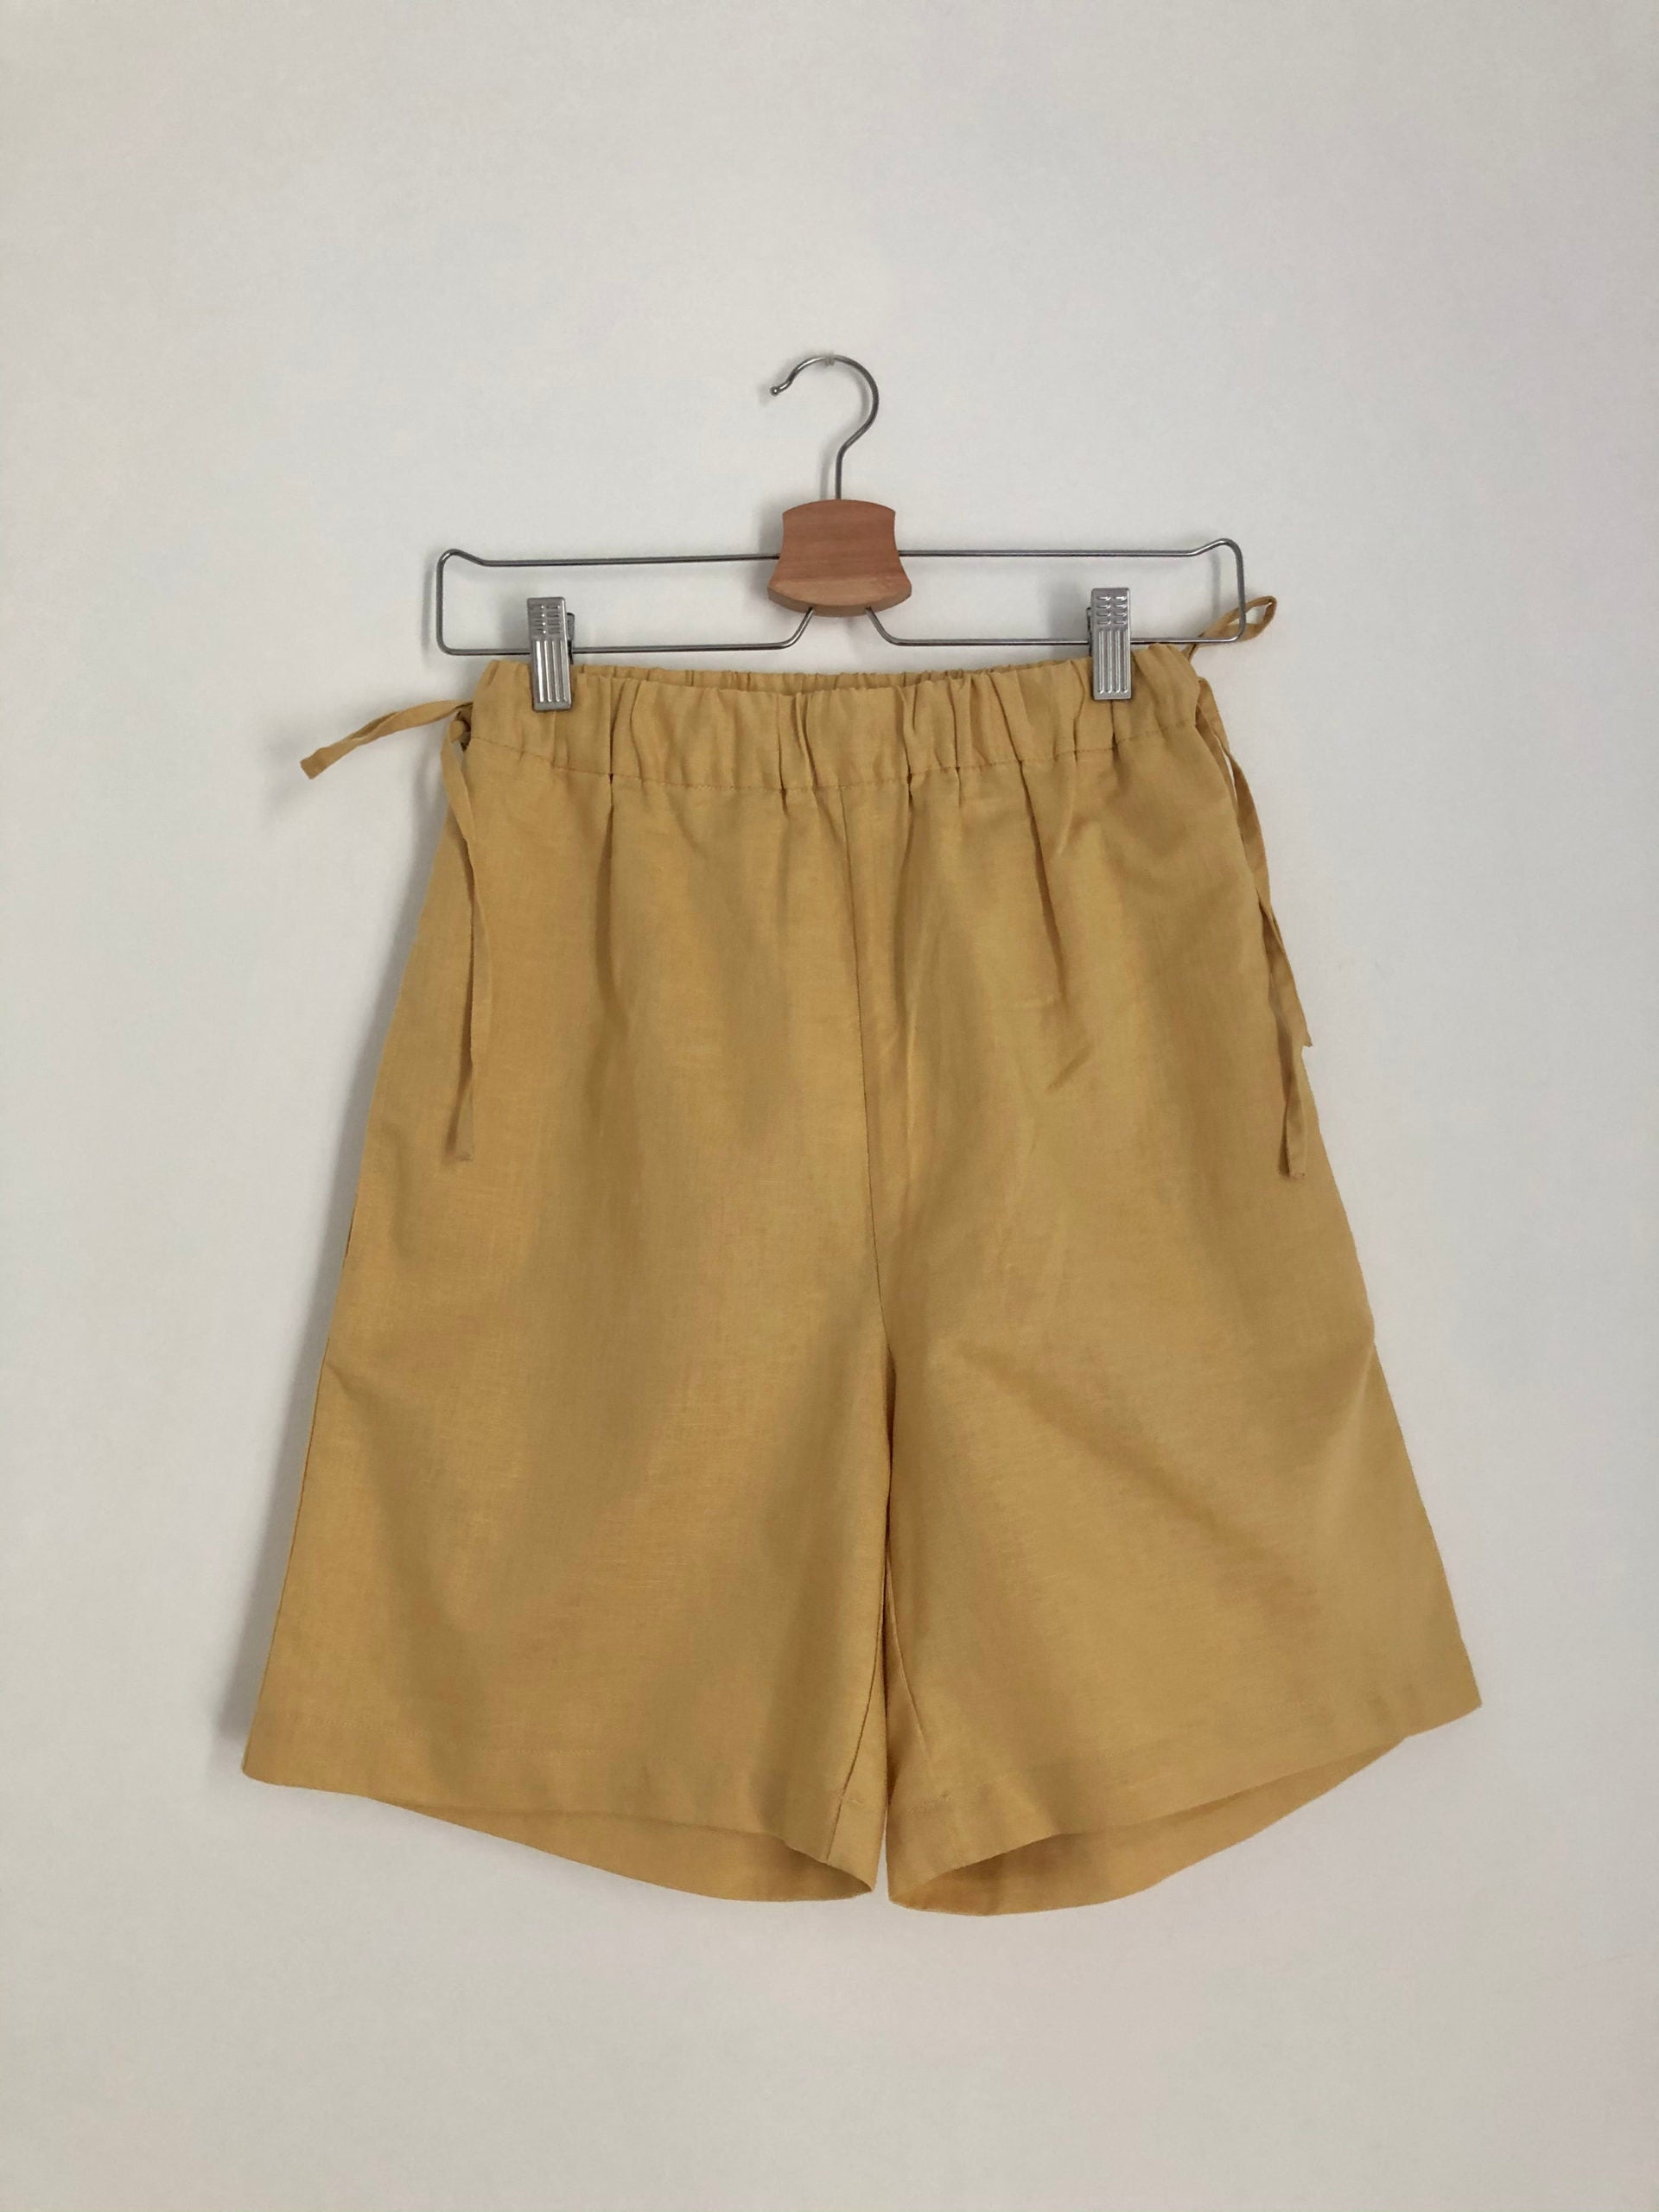 SIDE TIE SHORTS in yellow